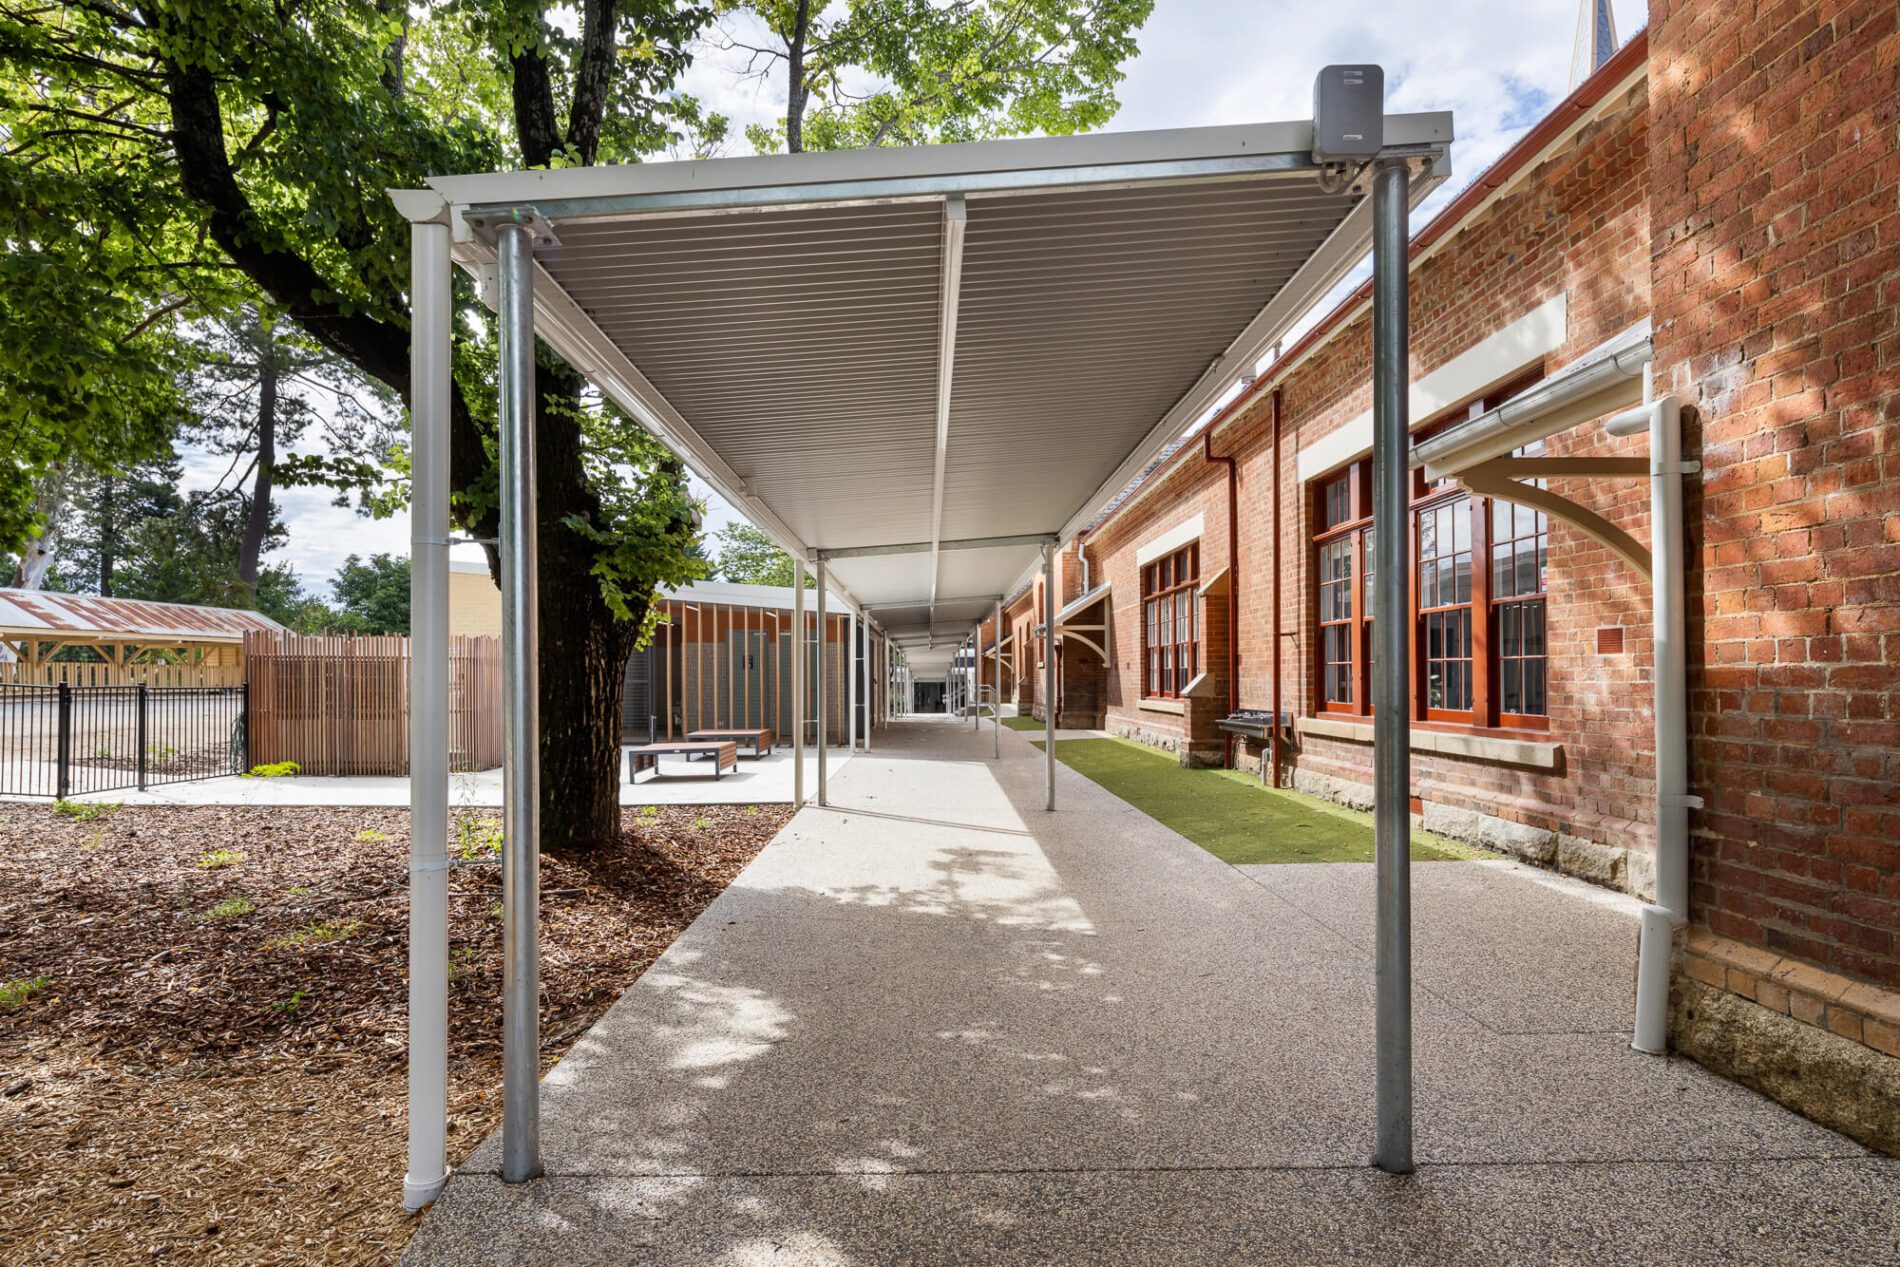 Covered walkway parralel to but separated from heritage school building